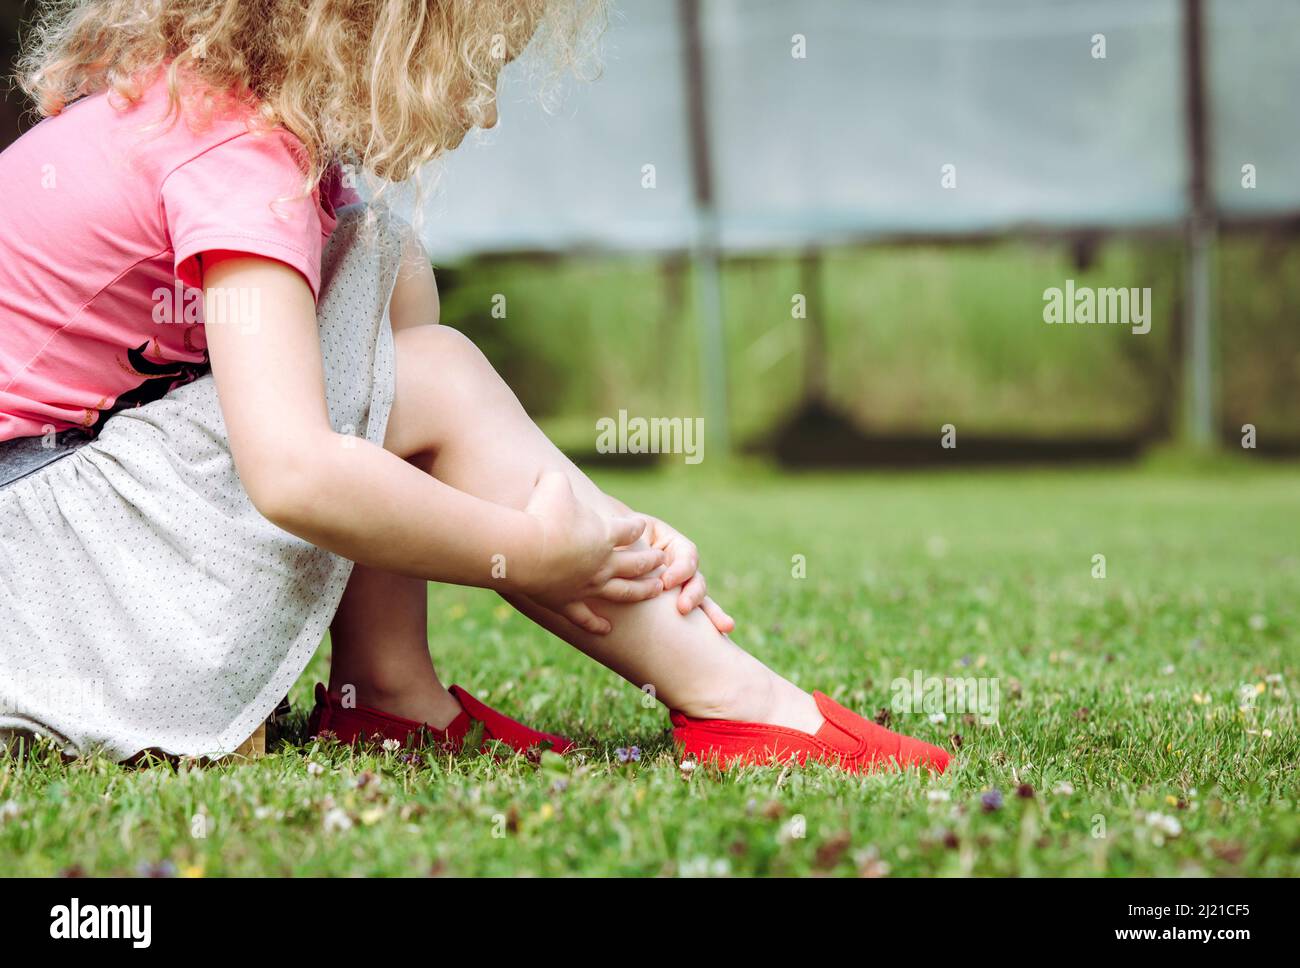 Trampoline jumping accident concept. Girl child holding sprained ankle with hands outdoors by the home garden trampoline. Hazards at home concept. Stock Photo